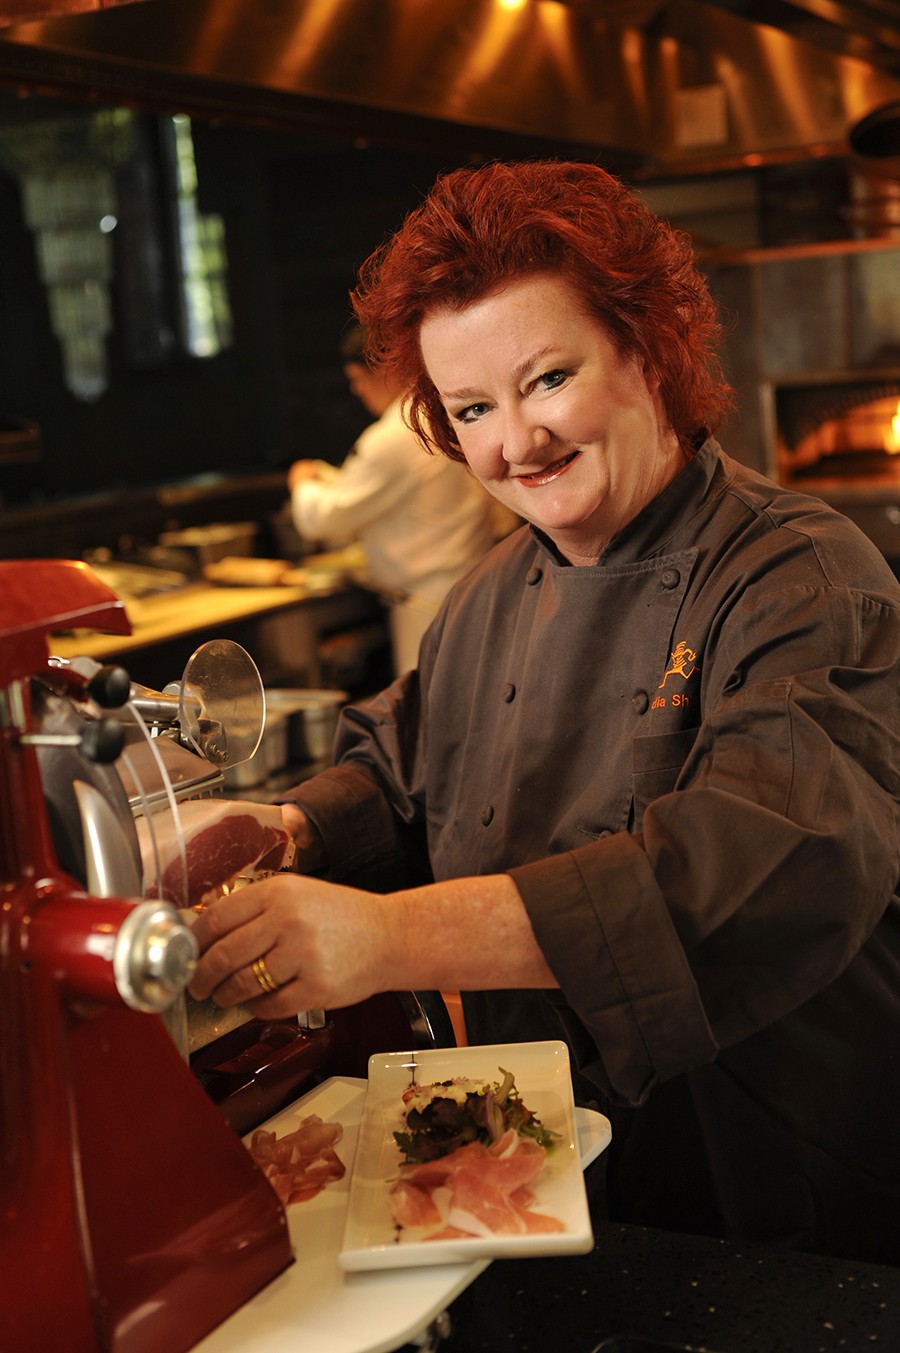 A red-headed woman in chef clothes stands in a restaurant kitchen and smiles at the camera.